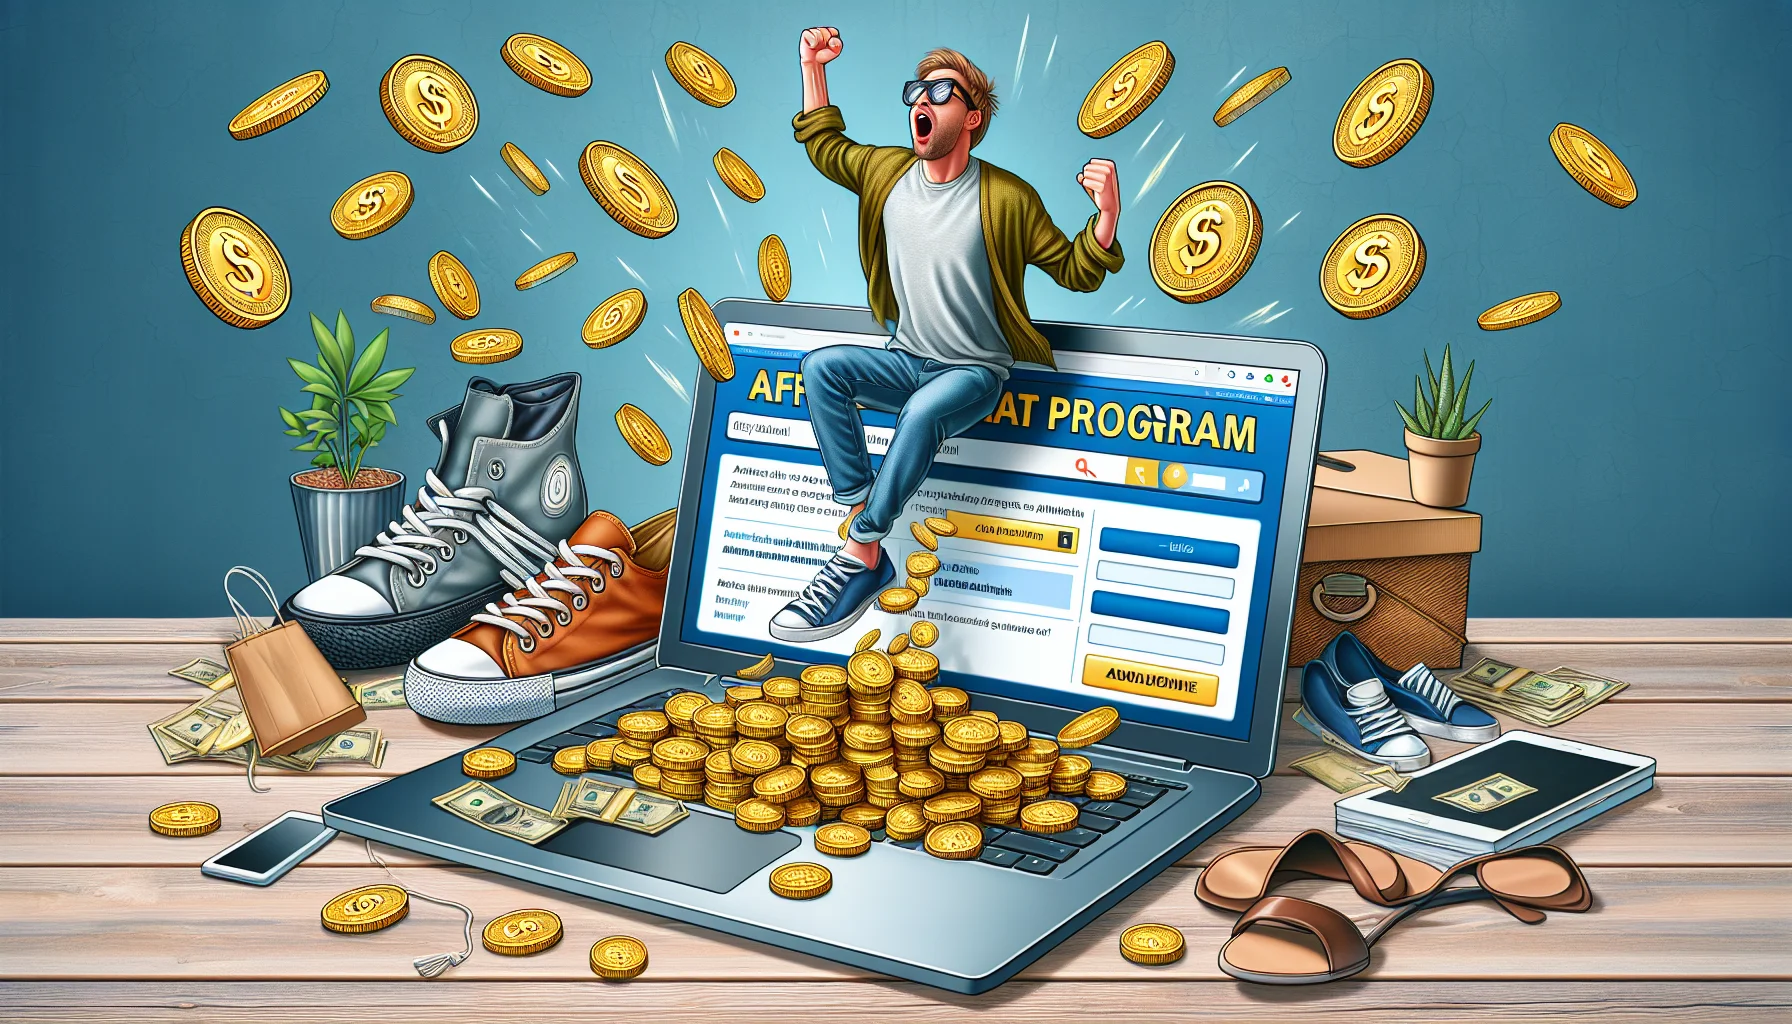 Generate an amusing, lifelike image symbolizing the affiliate program of a generic shoe brand. The scenario should convey the concept of earning money online. Incorporate elements like a webpage on a laptop screen displaying the affiliate program, some stylish shoes scattered around, and a steady stream of gold coins flowing from the screen, representing online income. To add humor, include a person reacting in giddy surprise or delight at the sight of the coins.